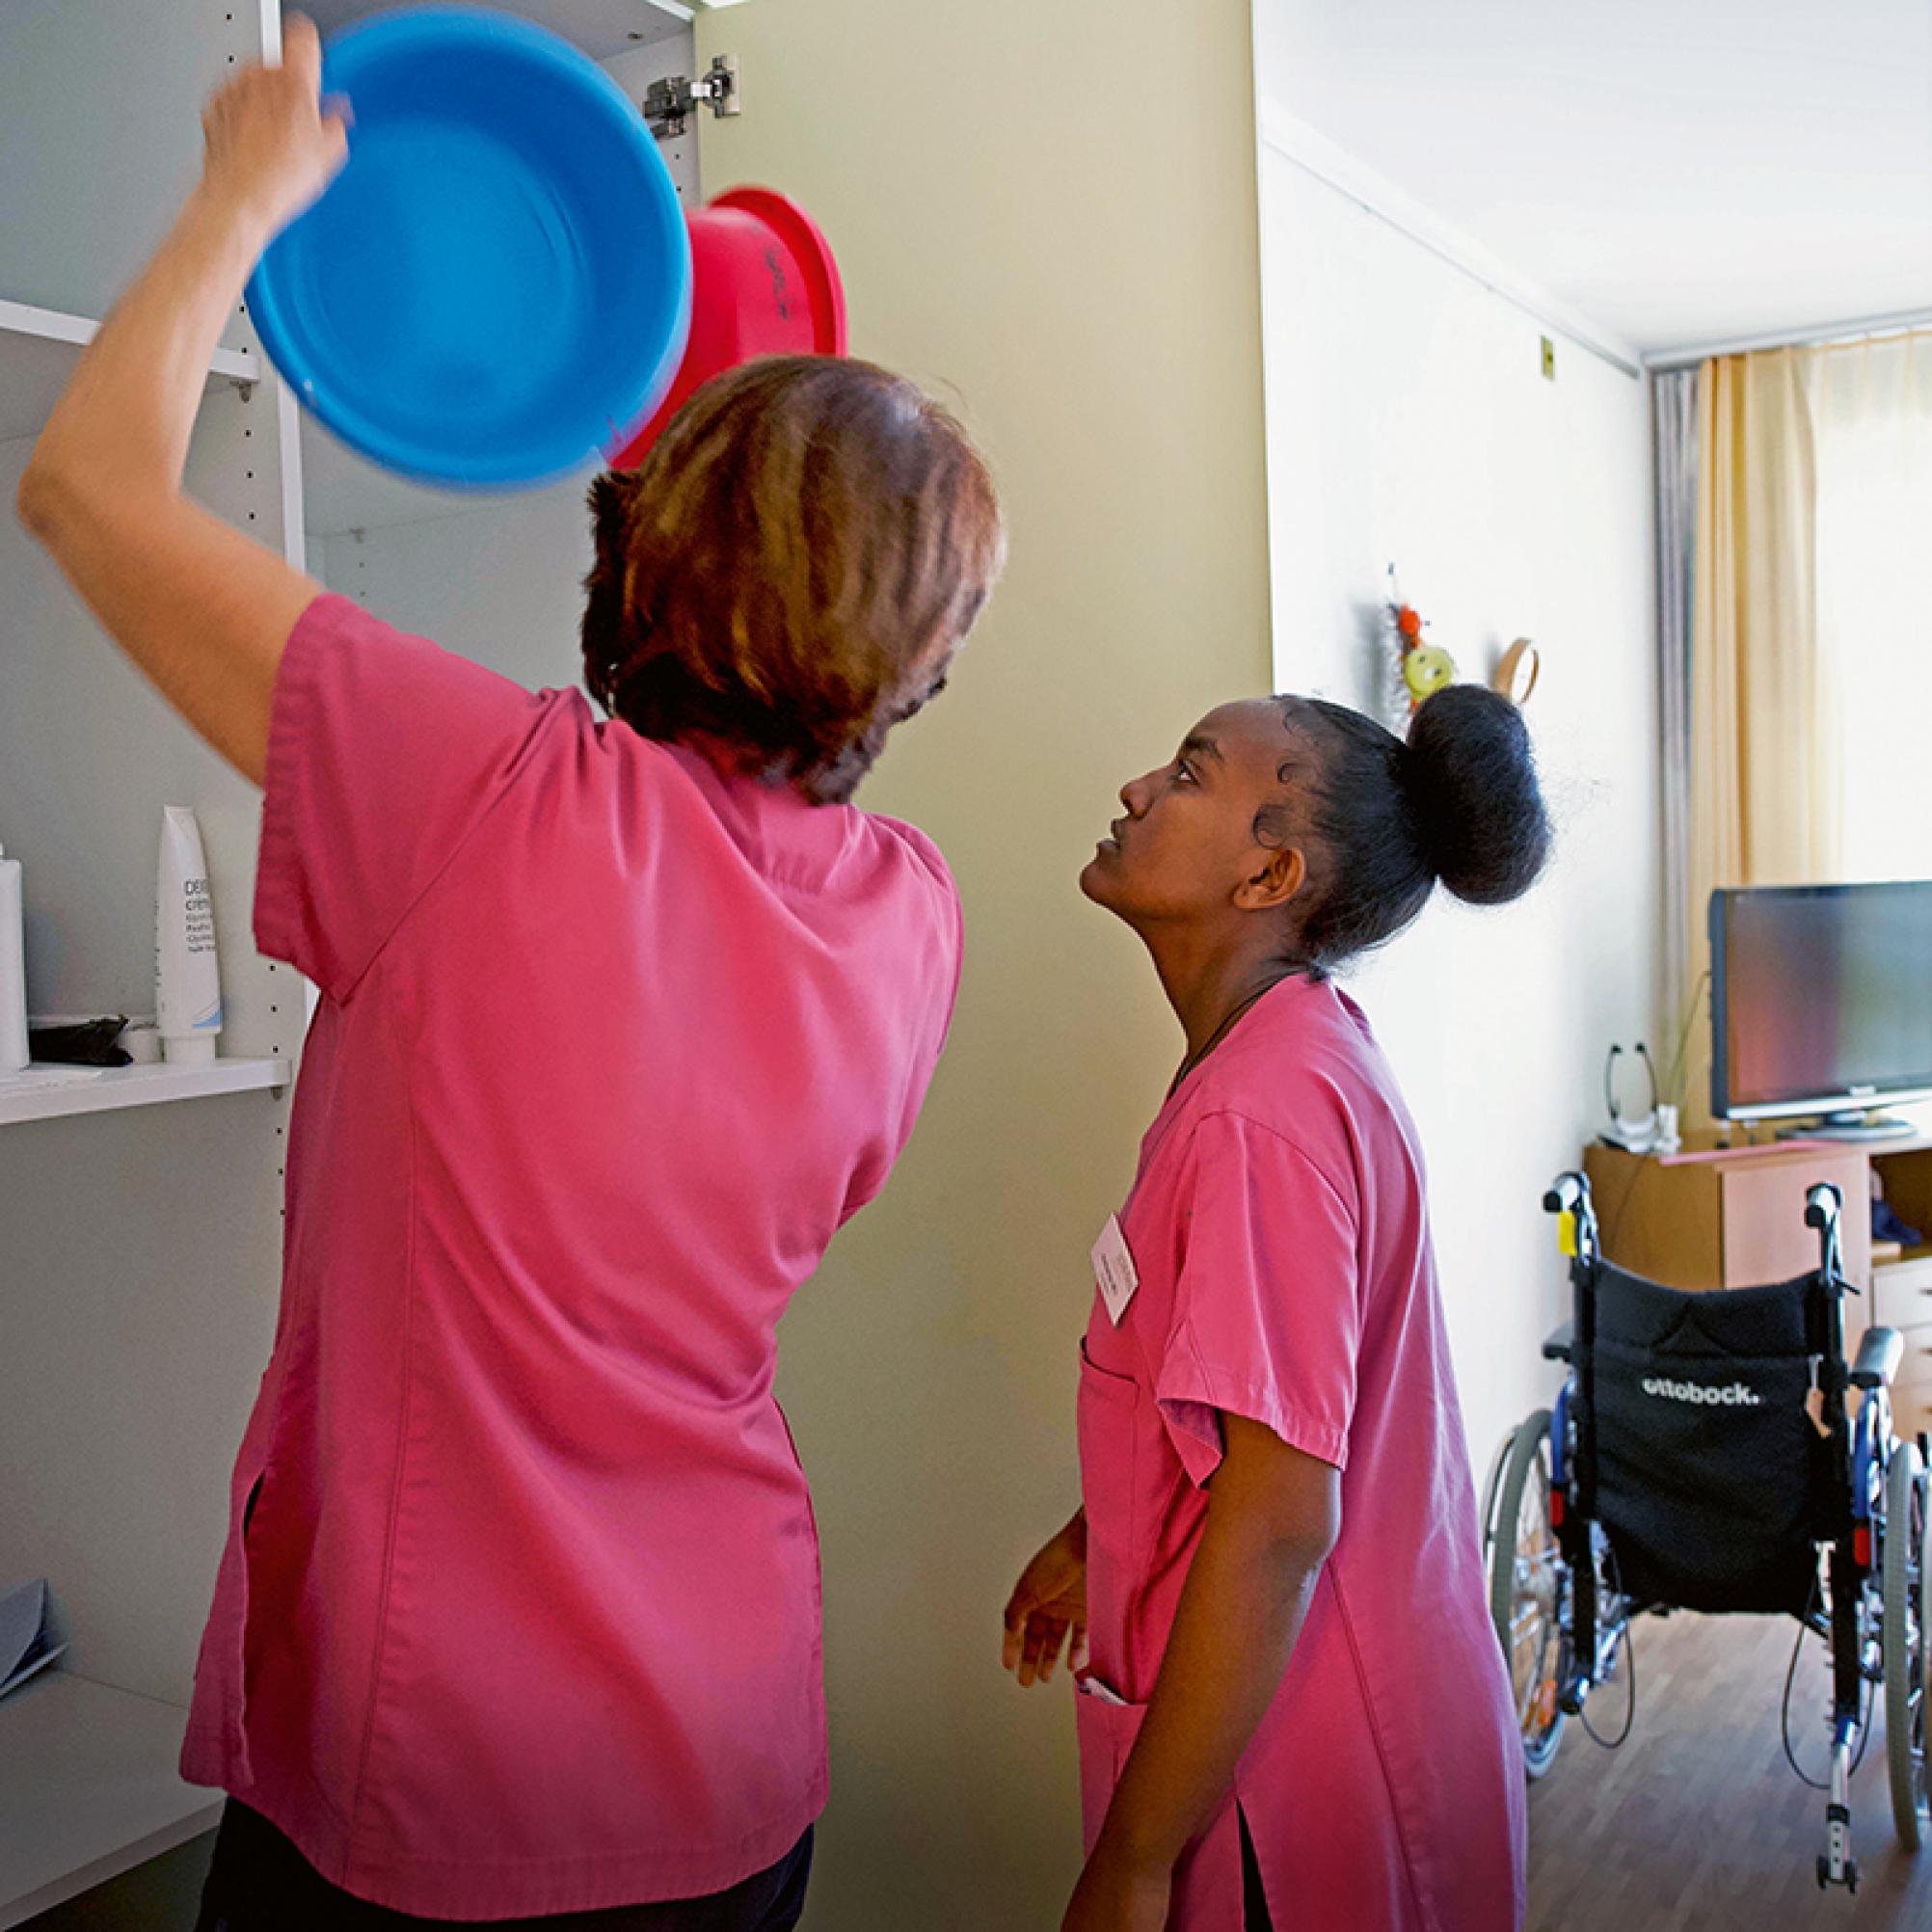 The photo shows a room in a retirement home. A nurse is showing to a young woman what her tasks are.